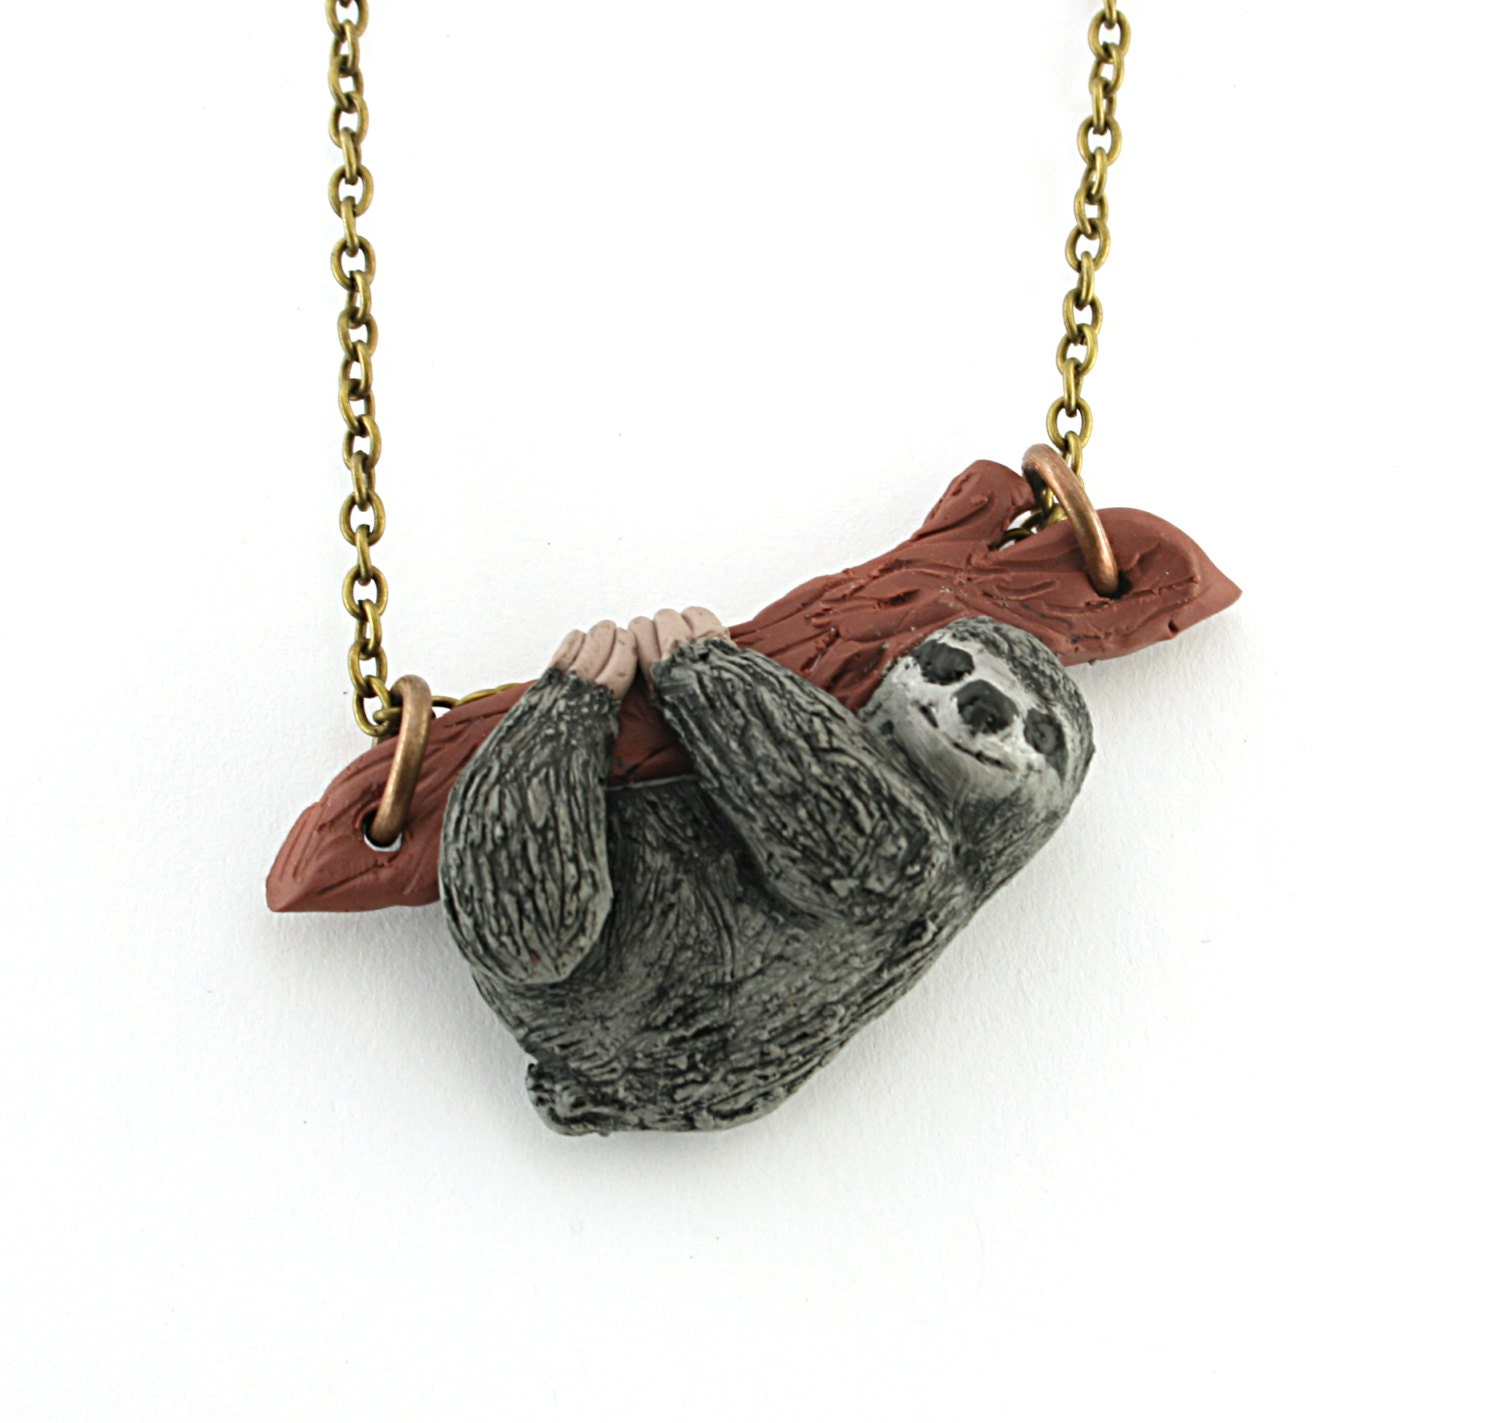 Sloth necklace charm pendant jewelry with bronze by ...